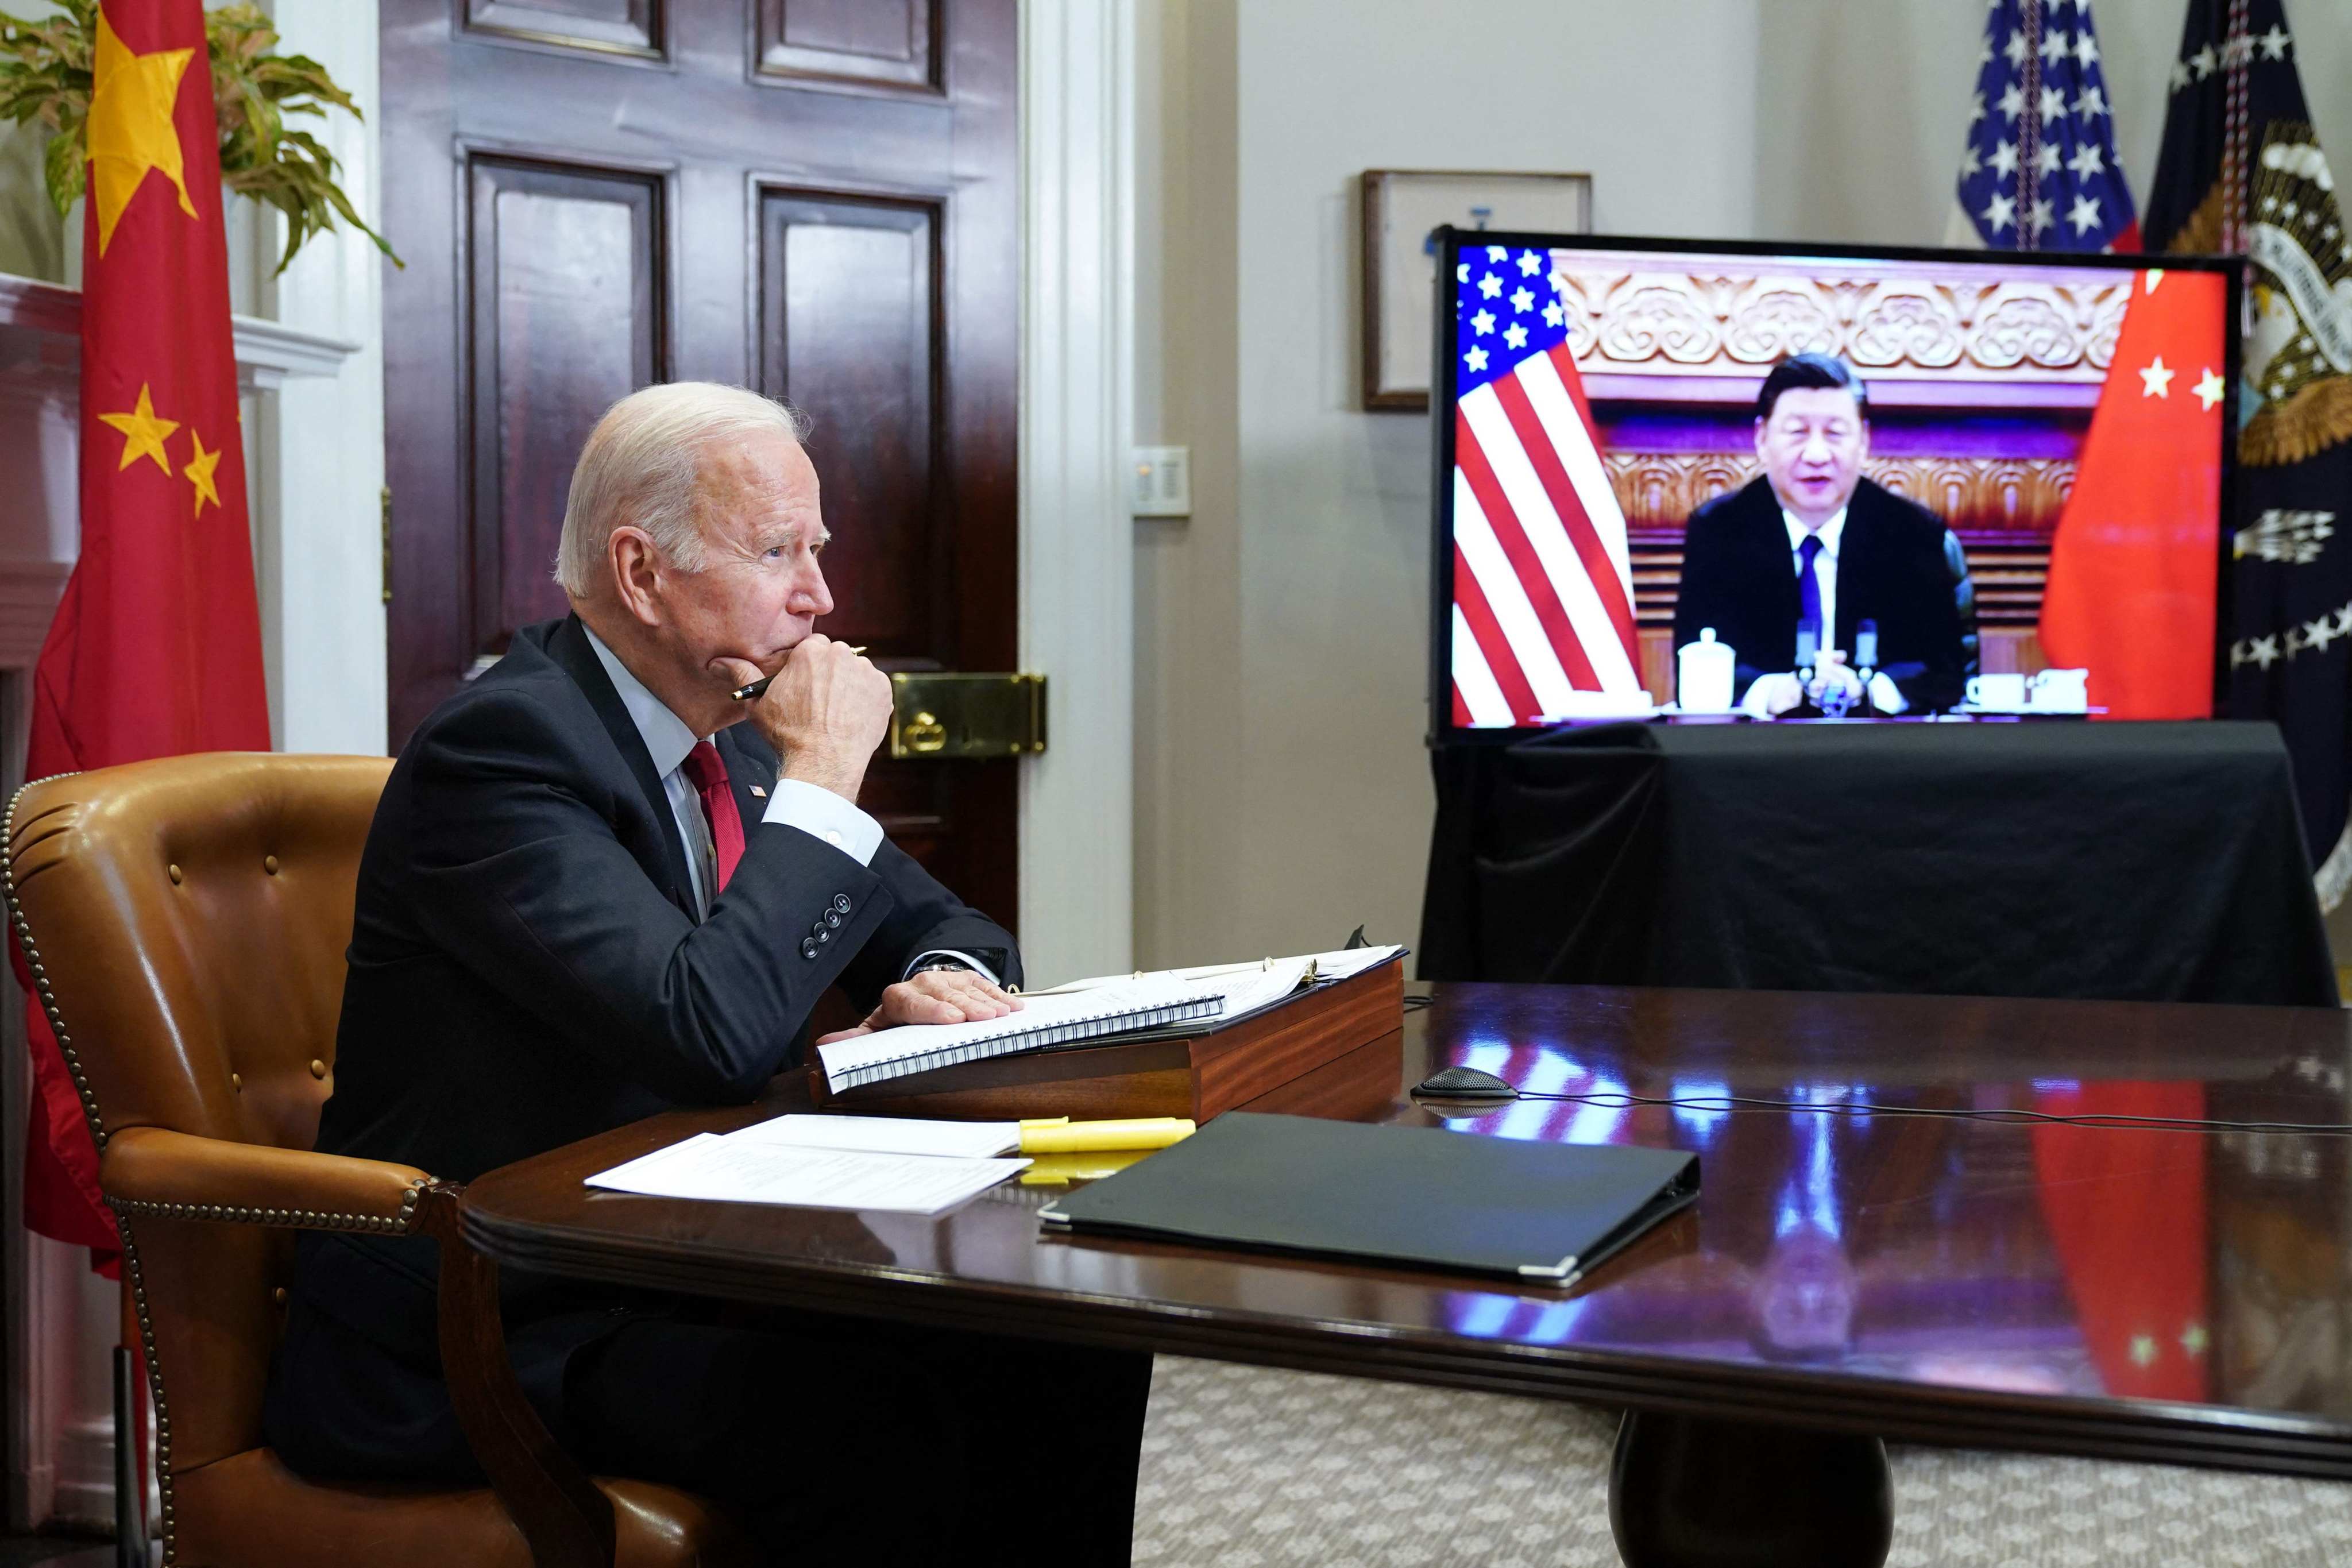 US President Joe Biden meets President Xi Jinping during a virtual summit from the Roosevelt Room of the White House in Washington on November 15, 2021. Photo: AFP